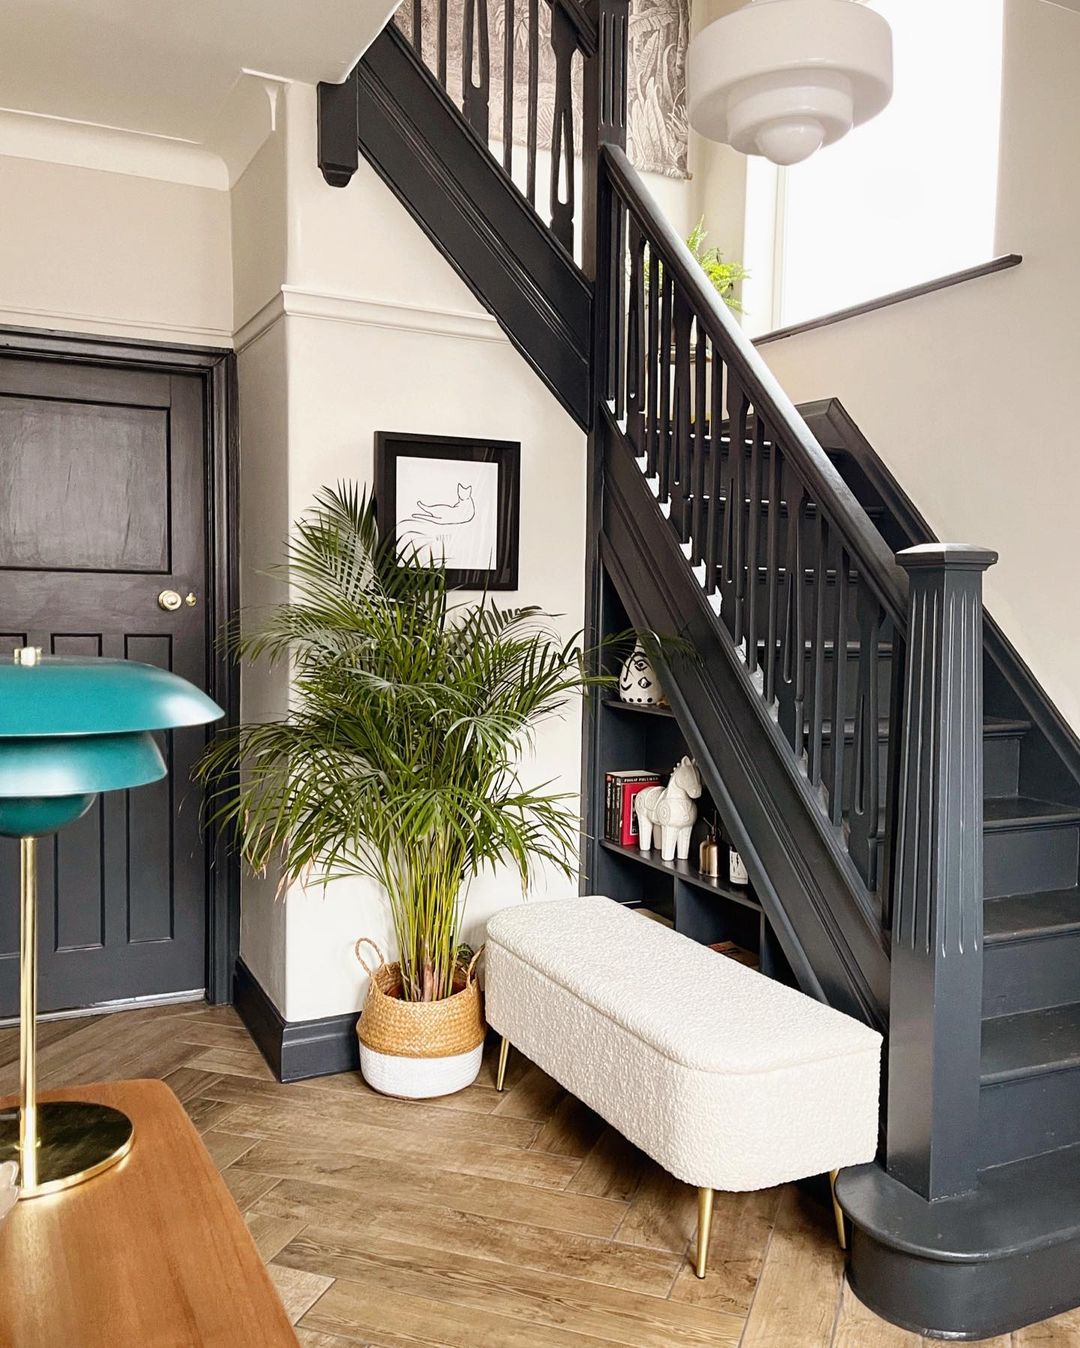 Maximise under-stair spaces